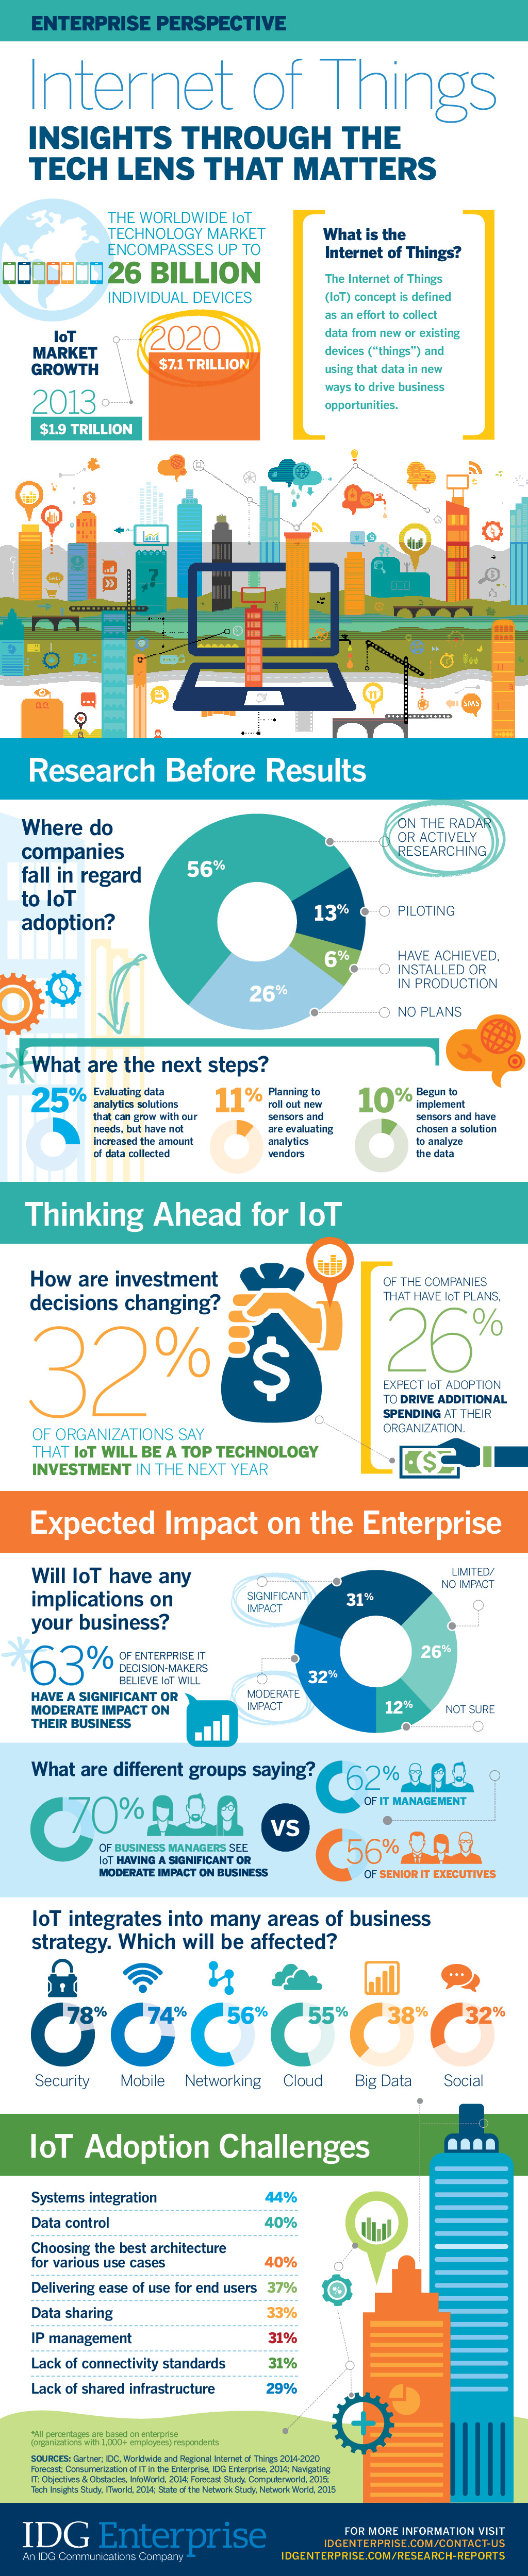 Internet of Things Insights from the Tech Lens